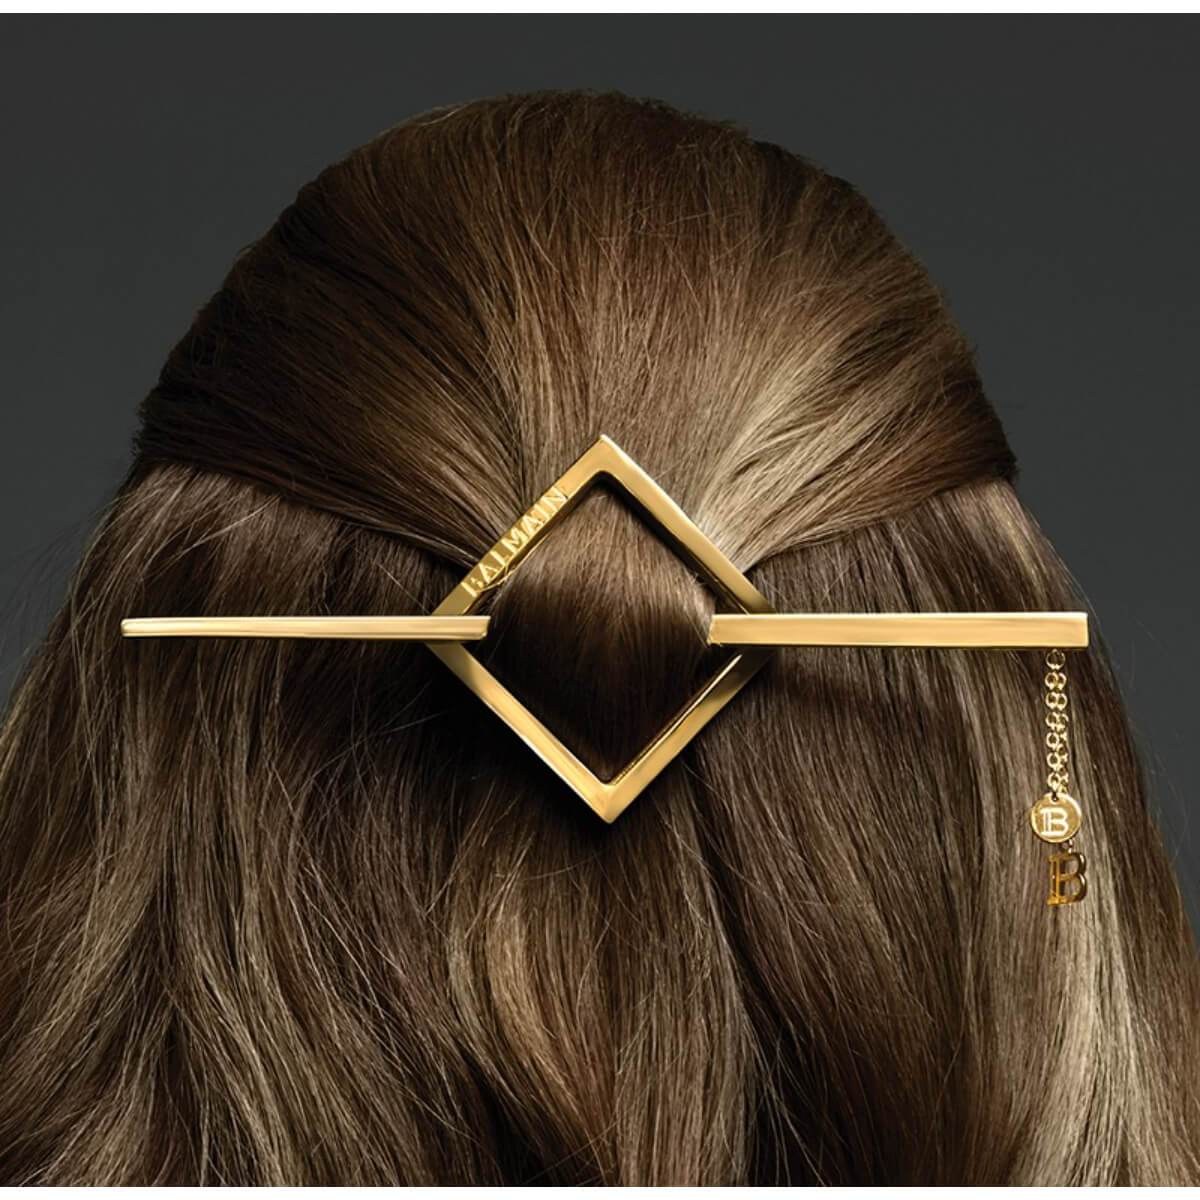 Limited Edition Barrette Pour Cheveux Jewelery Gold SS21